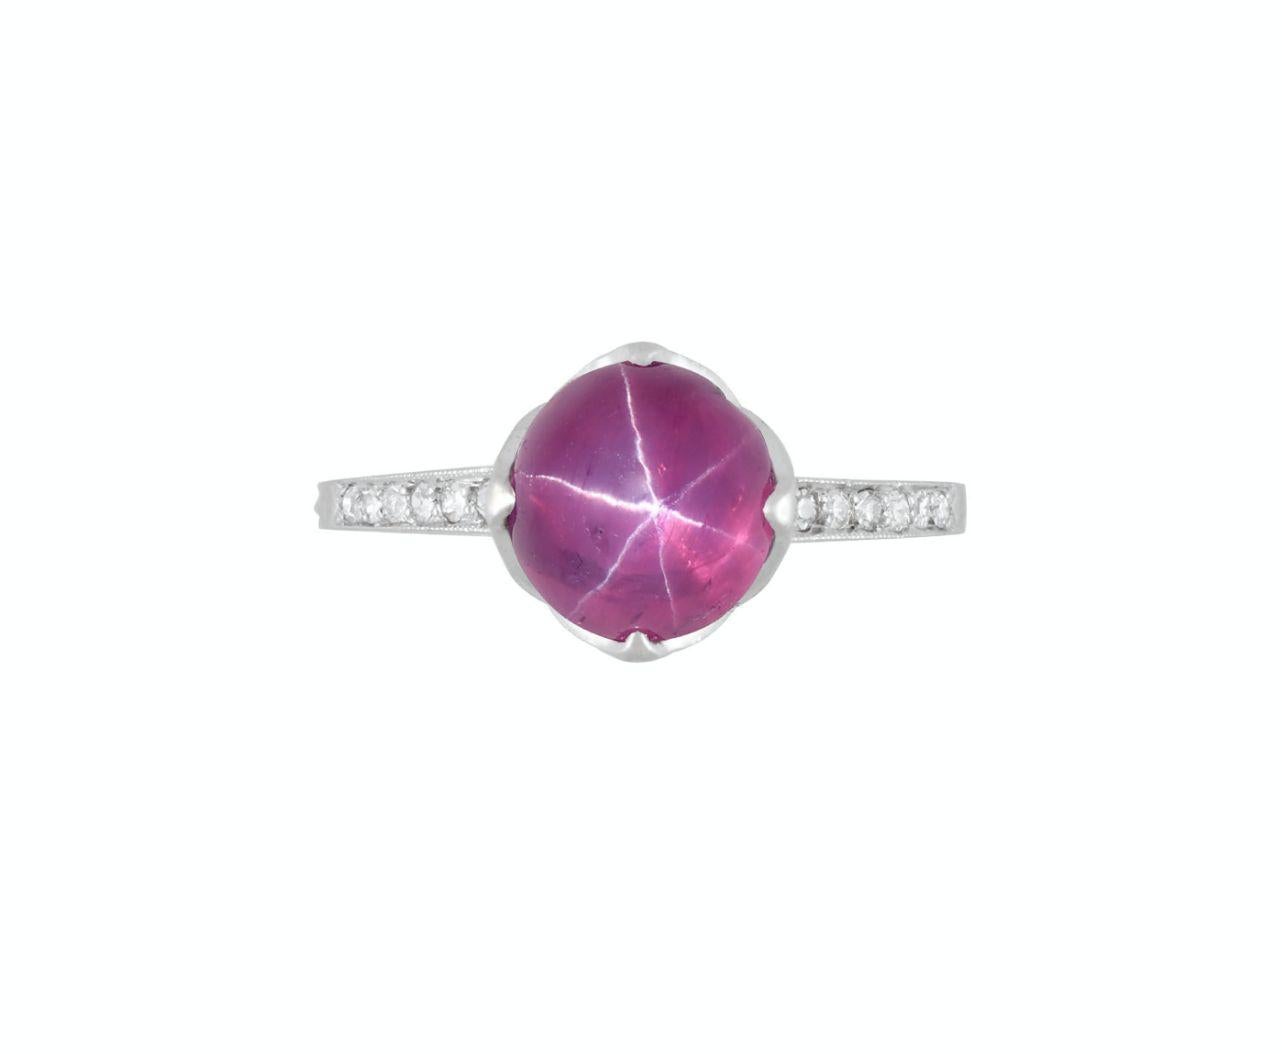 Cabochon GIA Certified No Heat Star Ruby in Vintage Platinum Ring Signed Dreicer & Co. For Sale